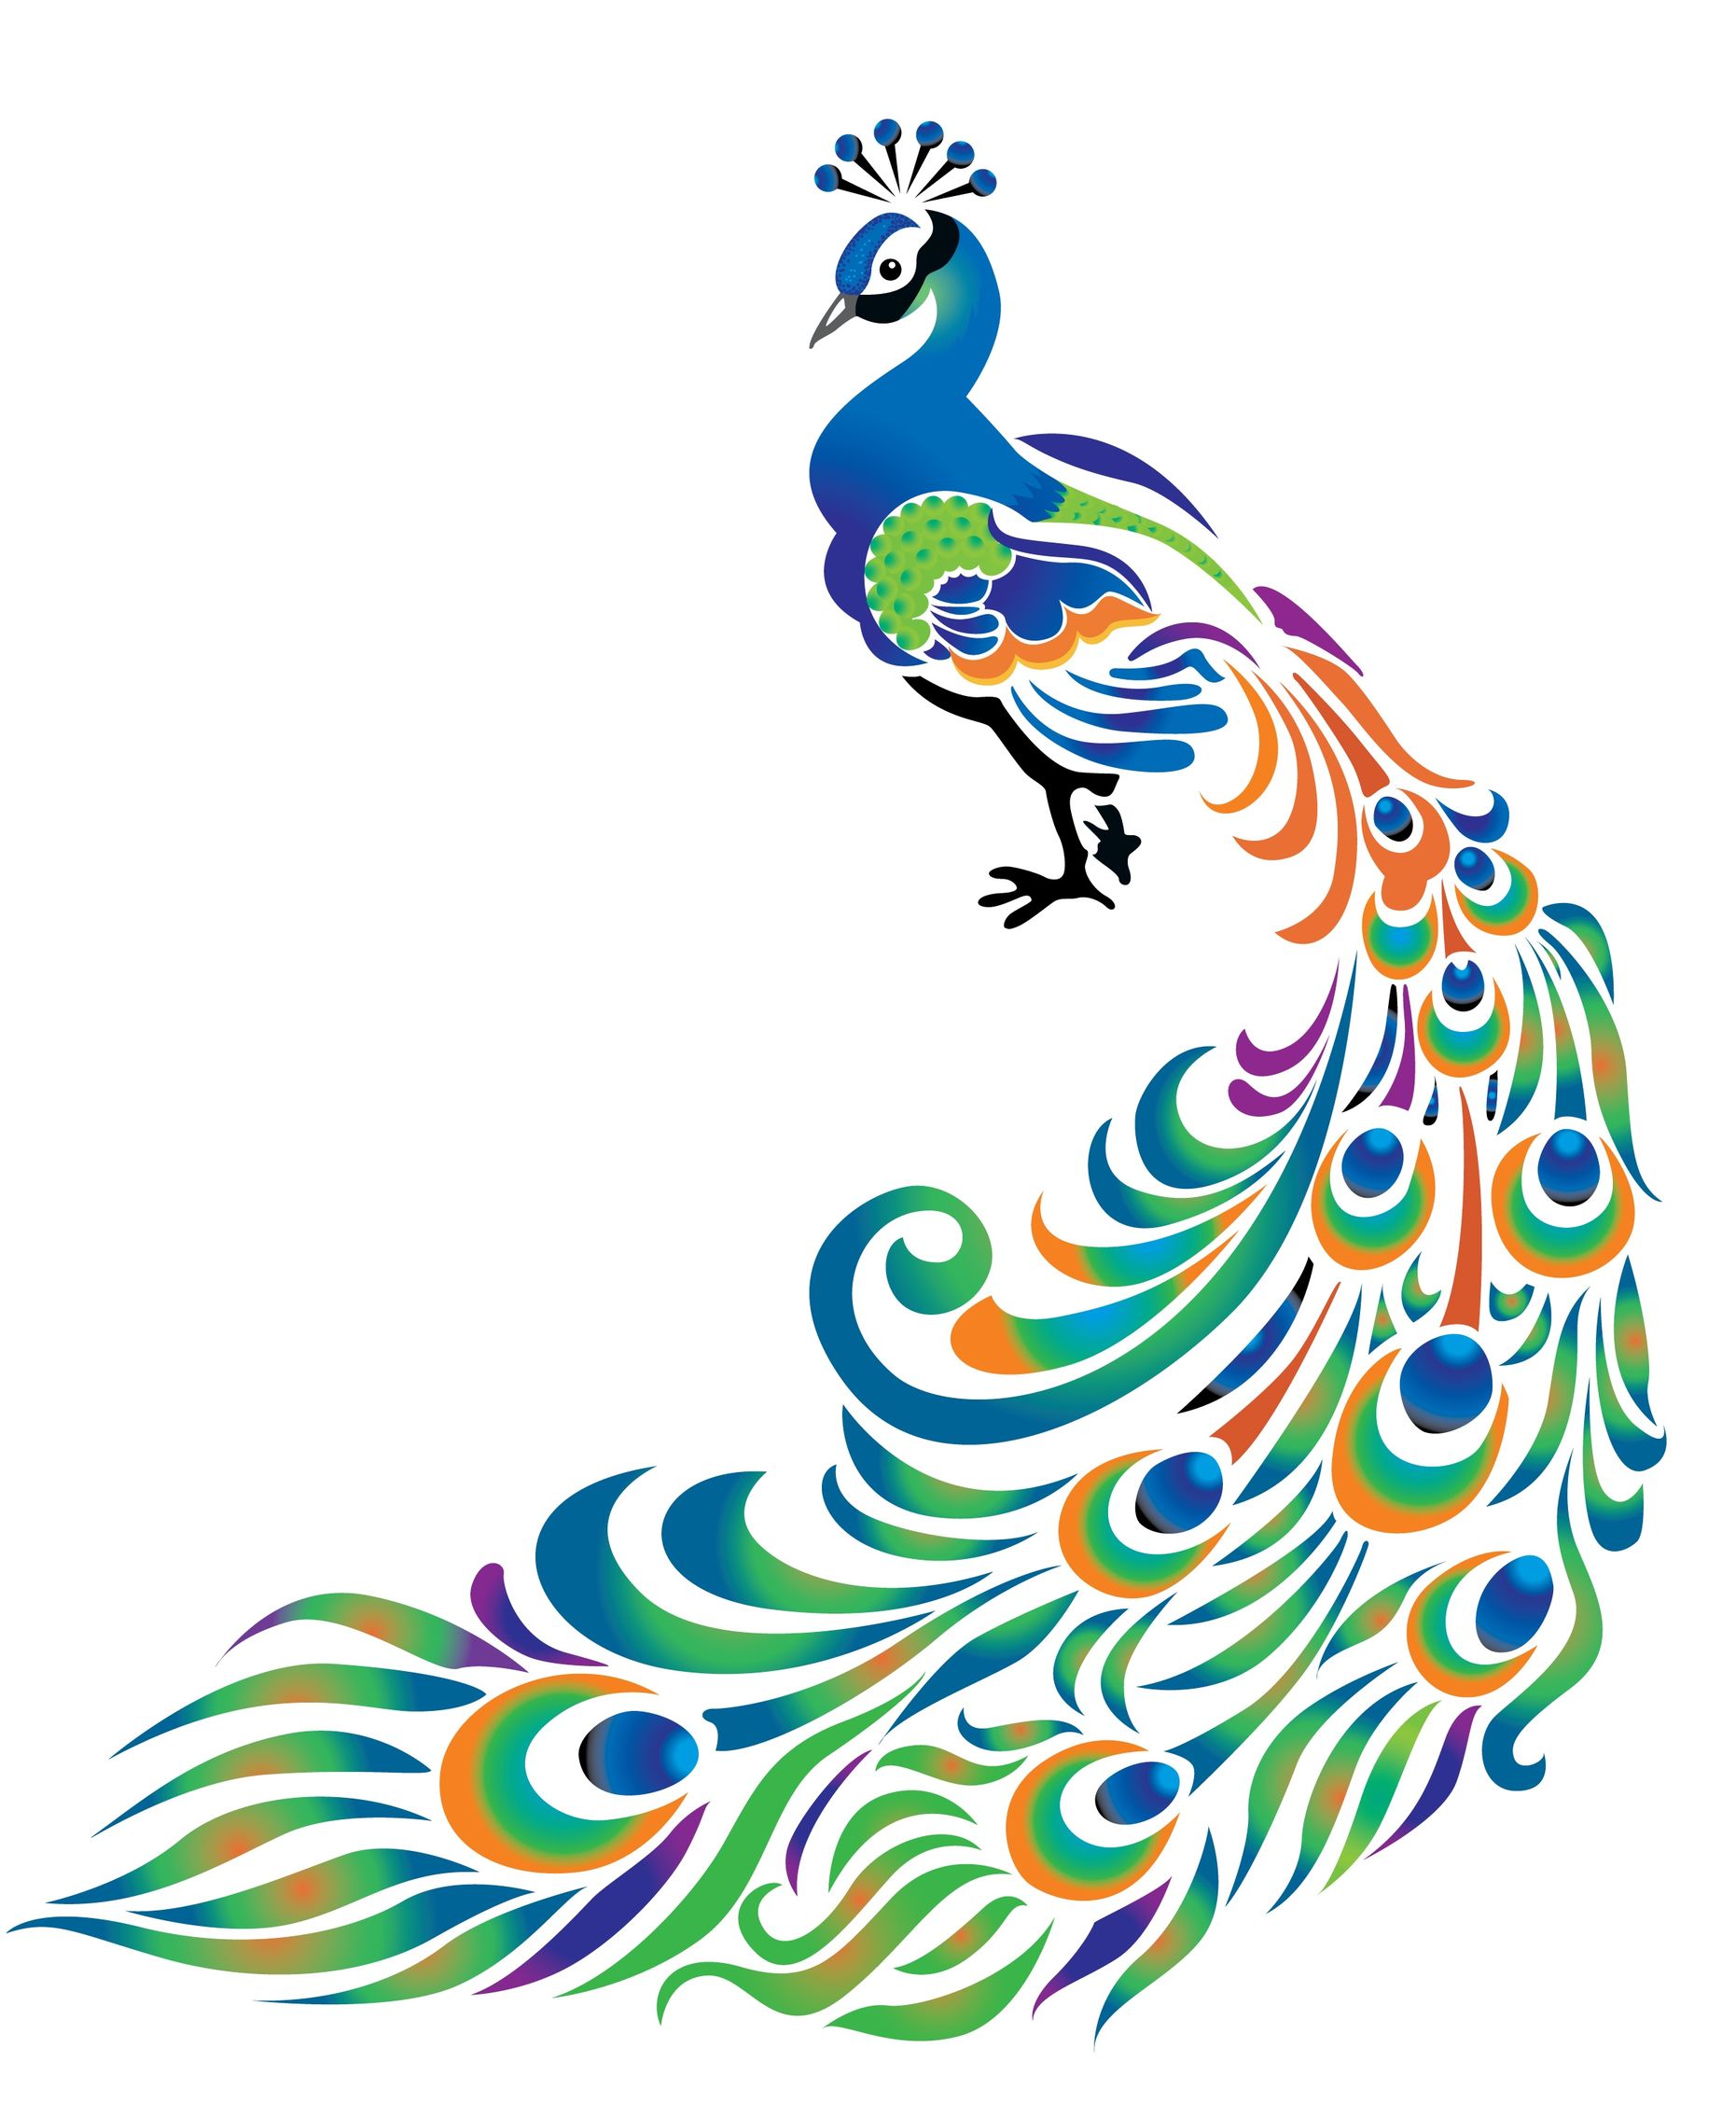 Peacock PNG Transparent Background, Free Download #22899 - FreeIconsPNG